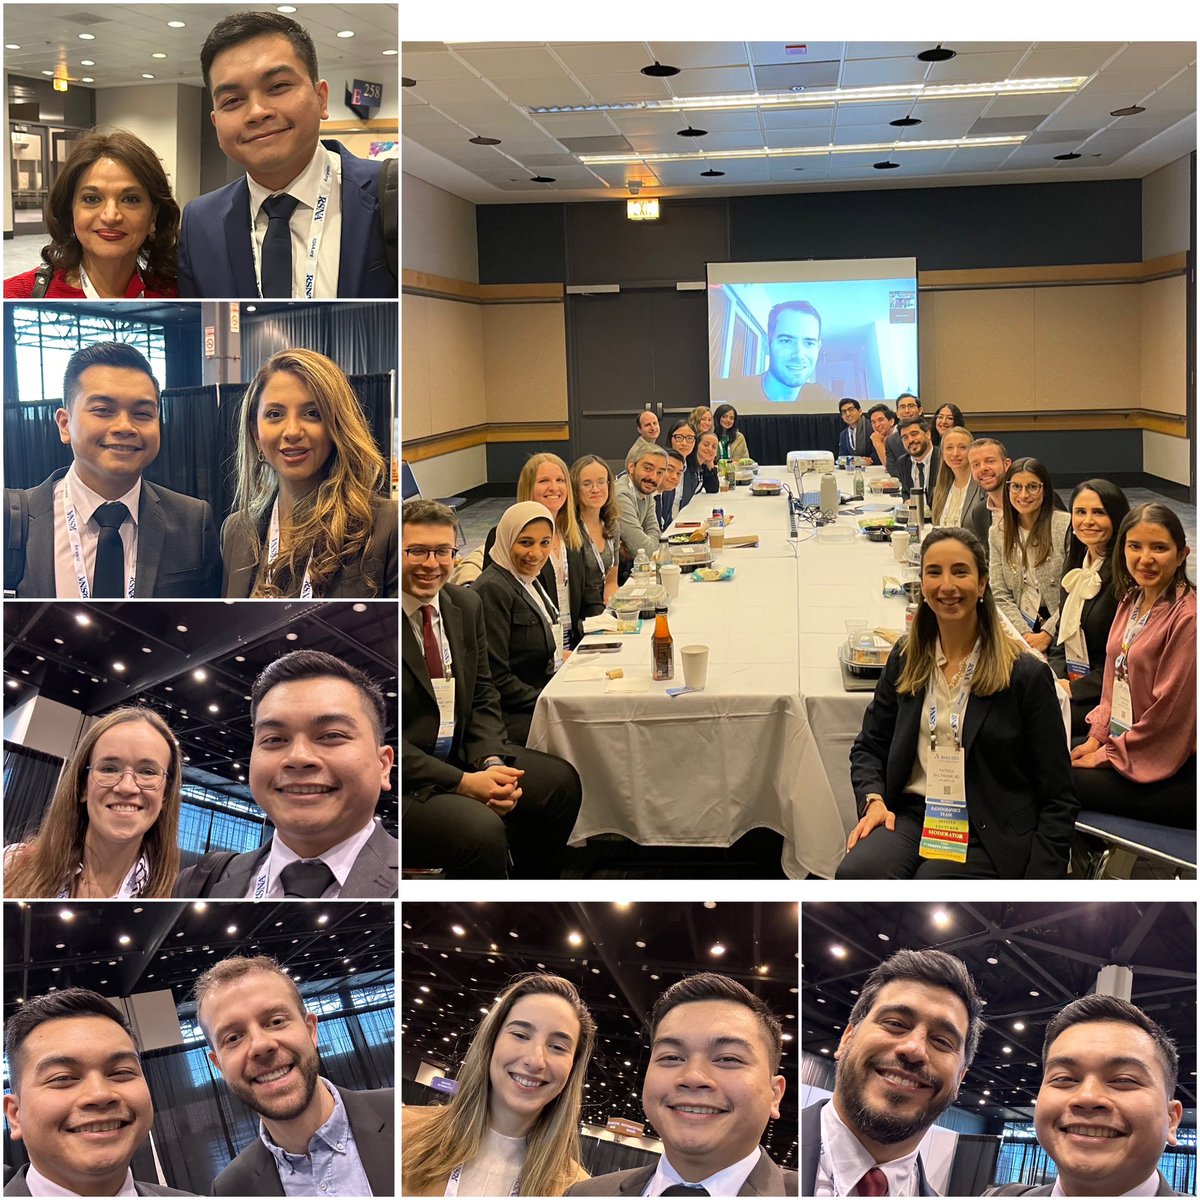 Definitely one of the highlights for me at #RSNA2023 ⭐️ Finally got to meet almost everyone in #RGTeam including our amazing editors @cookyscan1 and @PBalthazarMD